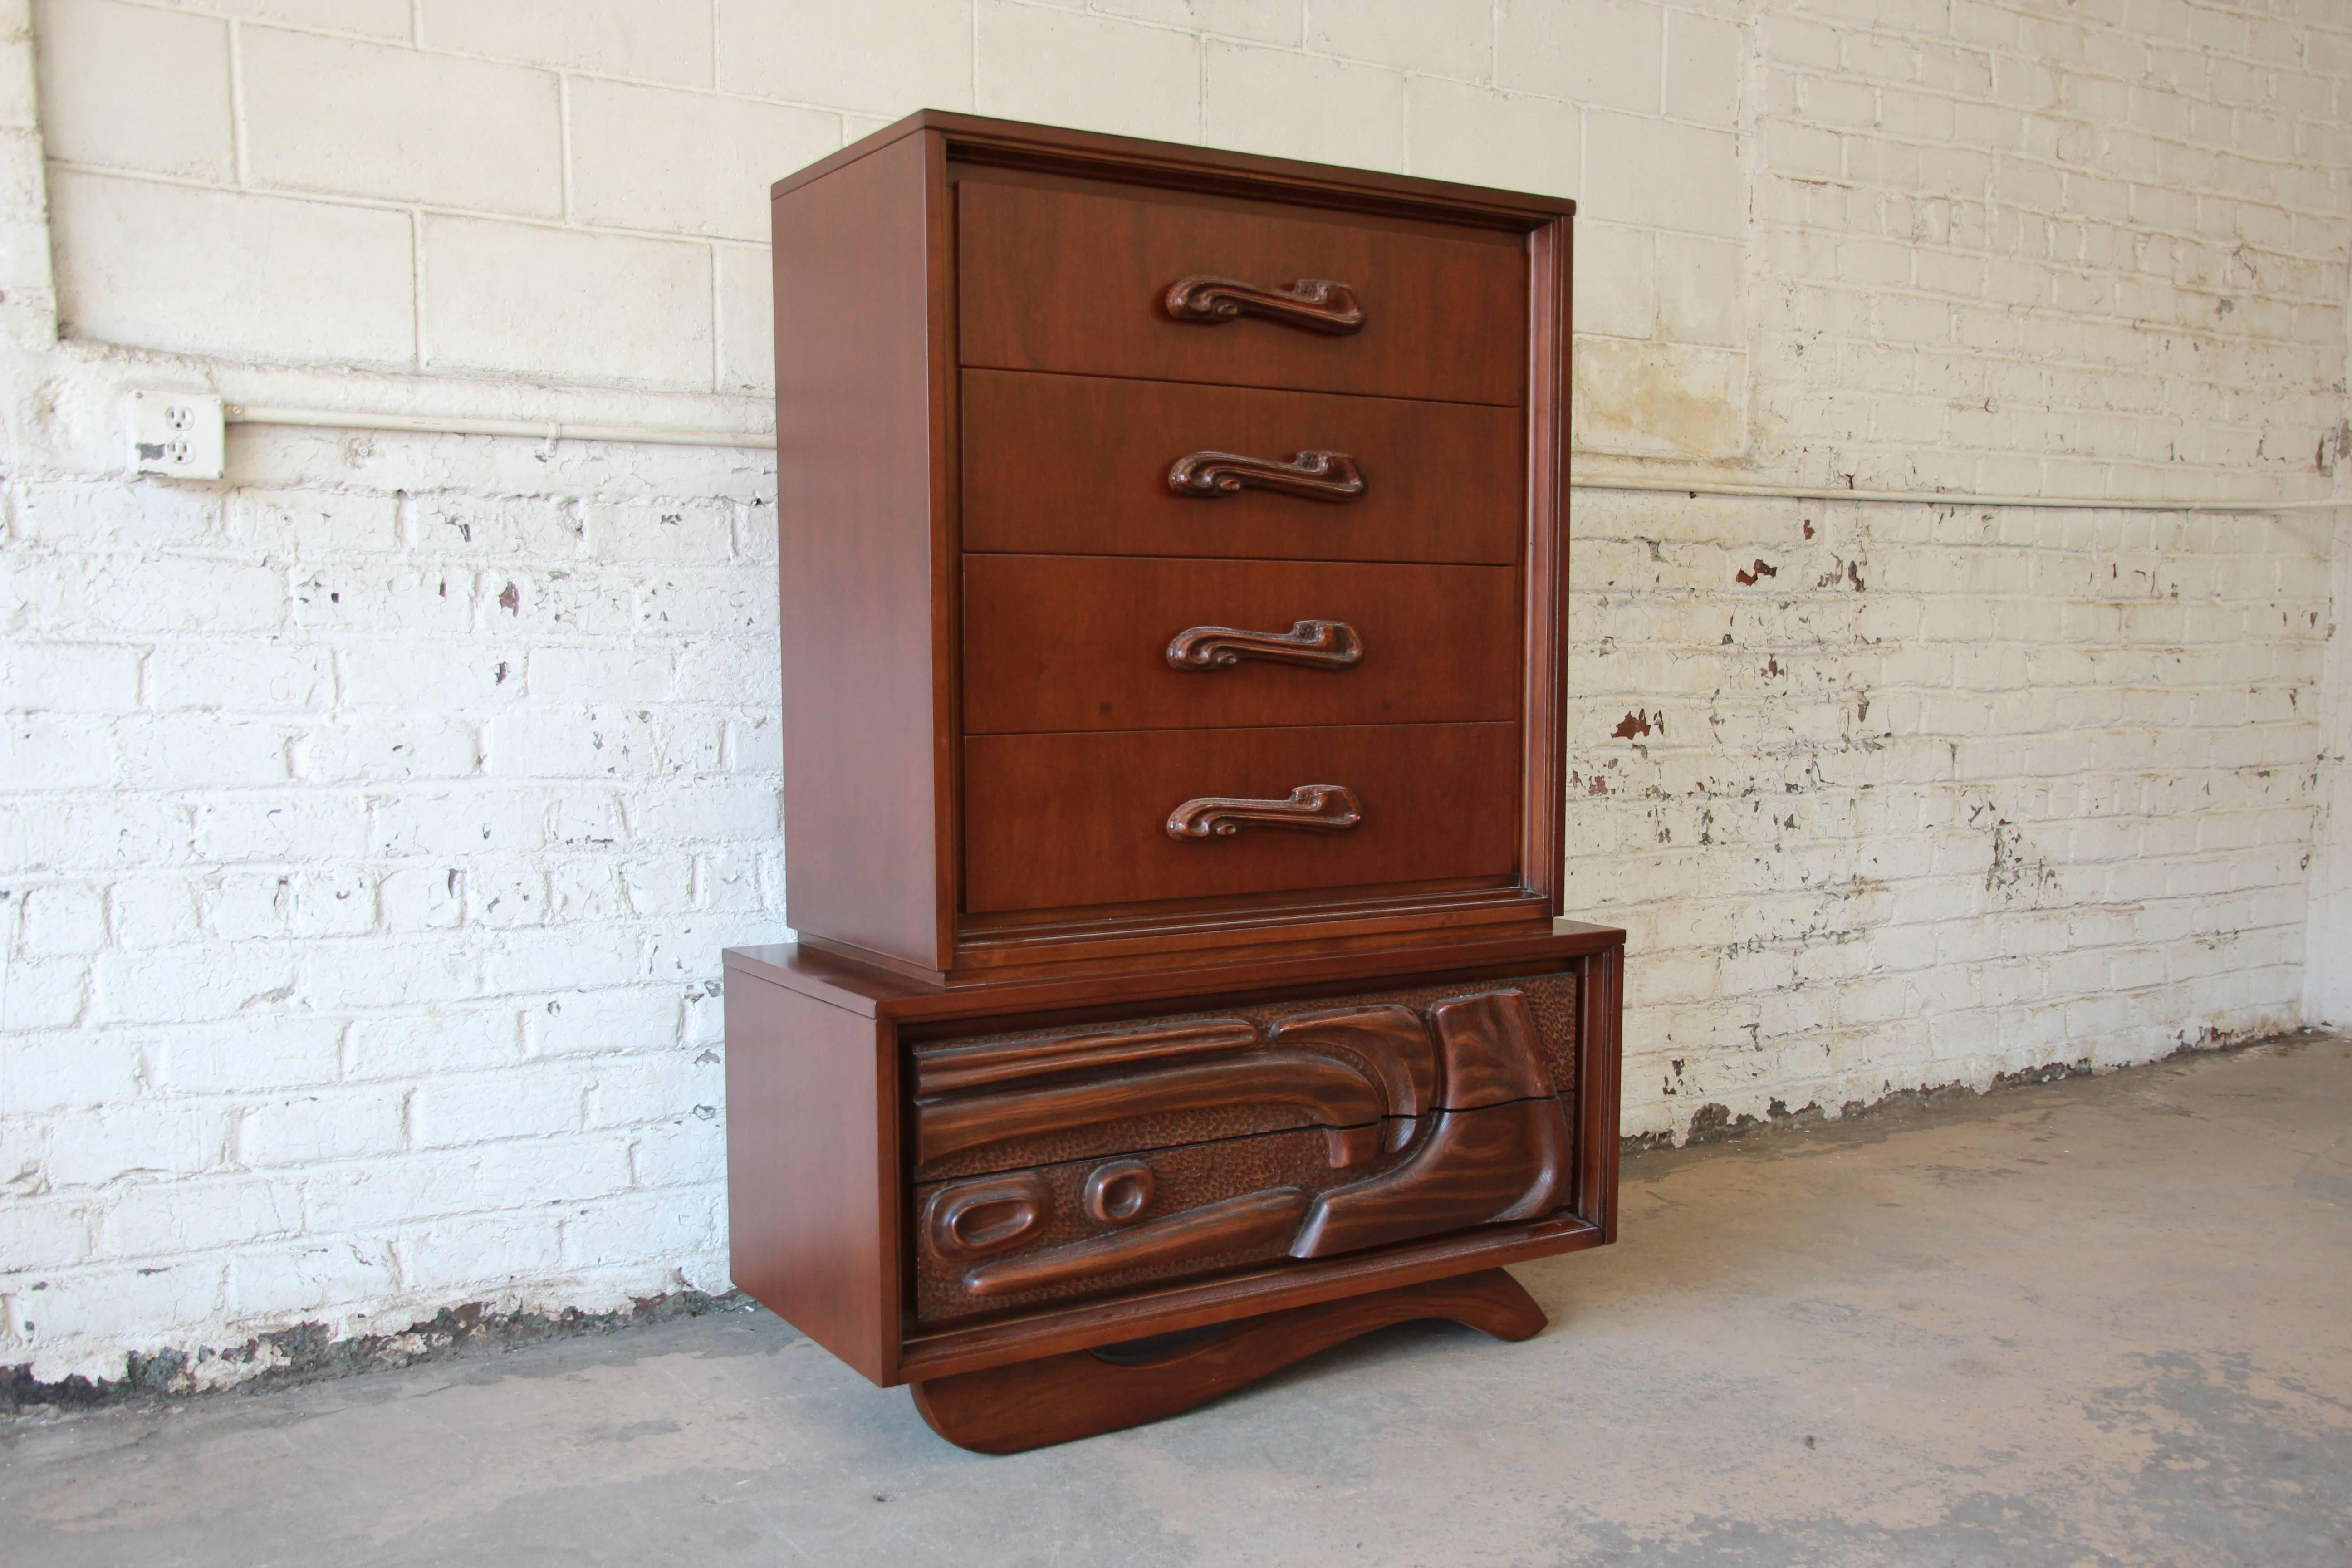 An outstanding Mid-Century Modern sculptural tiki highboy dresser by Pulaski. The highboy features stunning tropical mahogany wood grain and outstanding sculptural design, including the rare whale tail base. It has molded handles and panels that